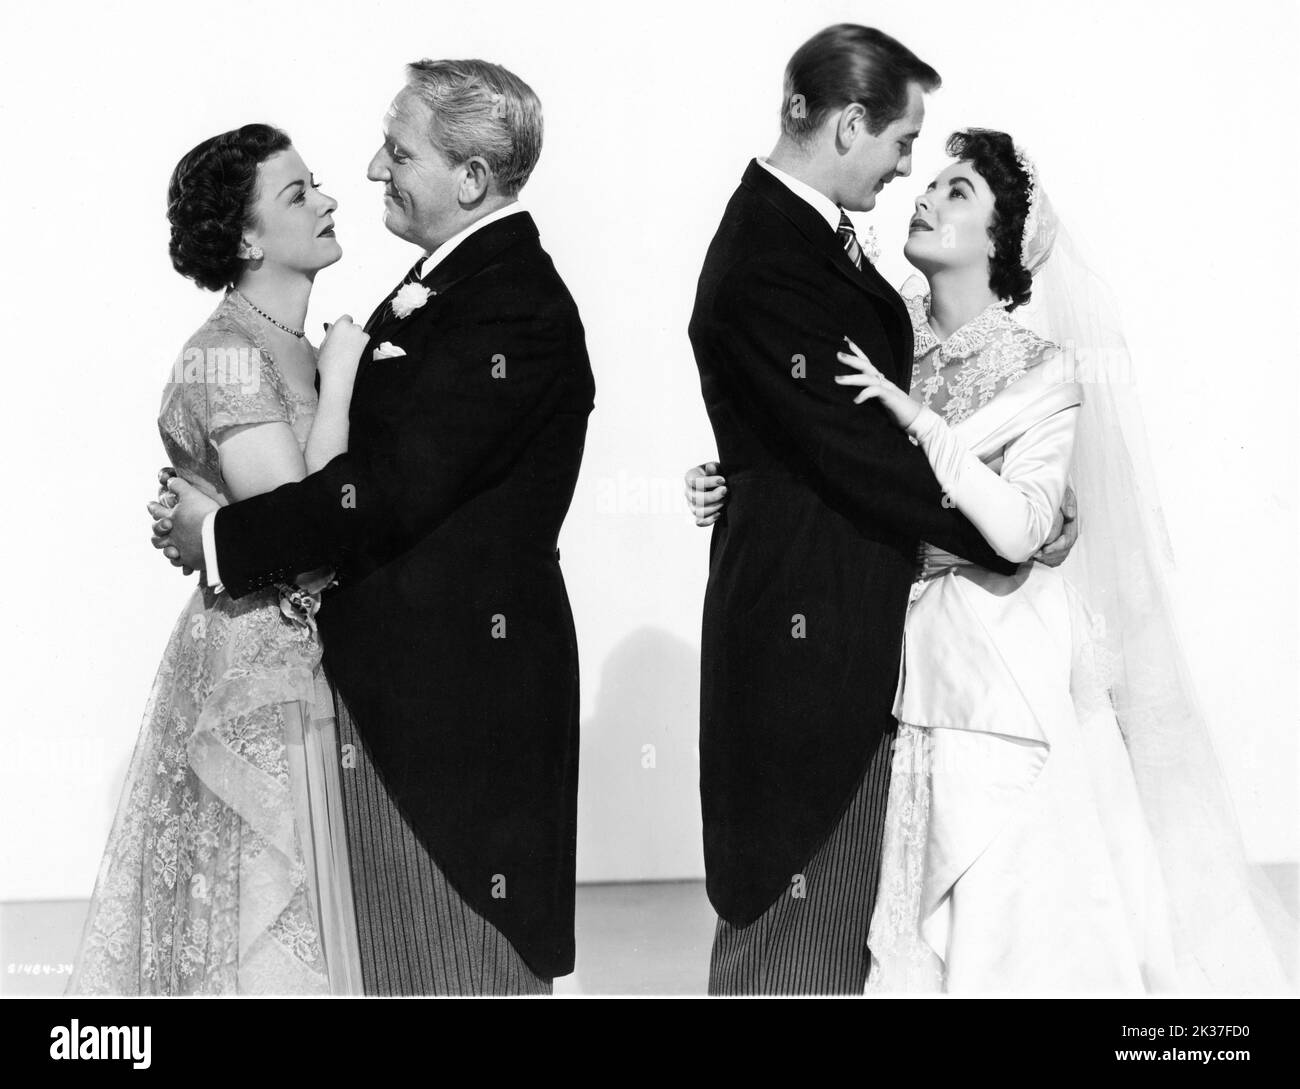 JOAN BENNETT SPENCER TRACY DON TAYLOR and ELIZABETH TAYLOR posed publicity portrait in FATHER OF THE BRIDE 1950 director VINCENTE MINNELLI novel Edward Streeter costumes Walter Plunkett (men) and Helen Rose (women) producer Pandro S. Berman Metro Goldwyn Mayer Stock Photo